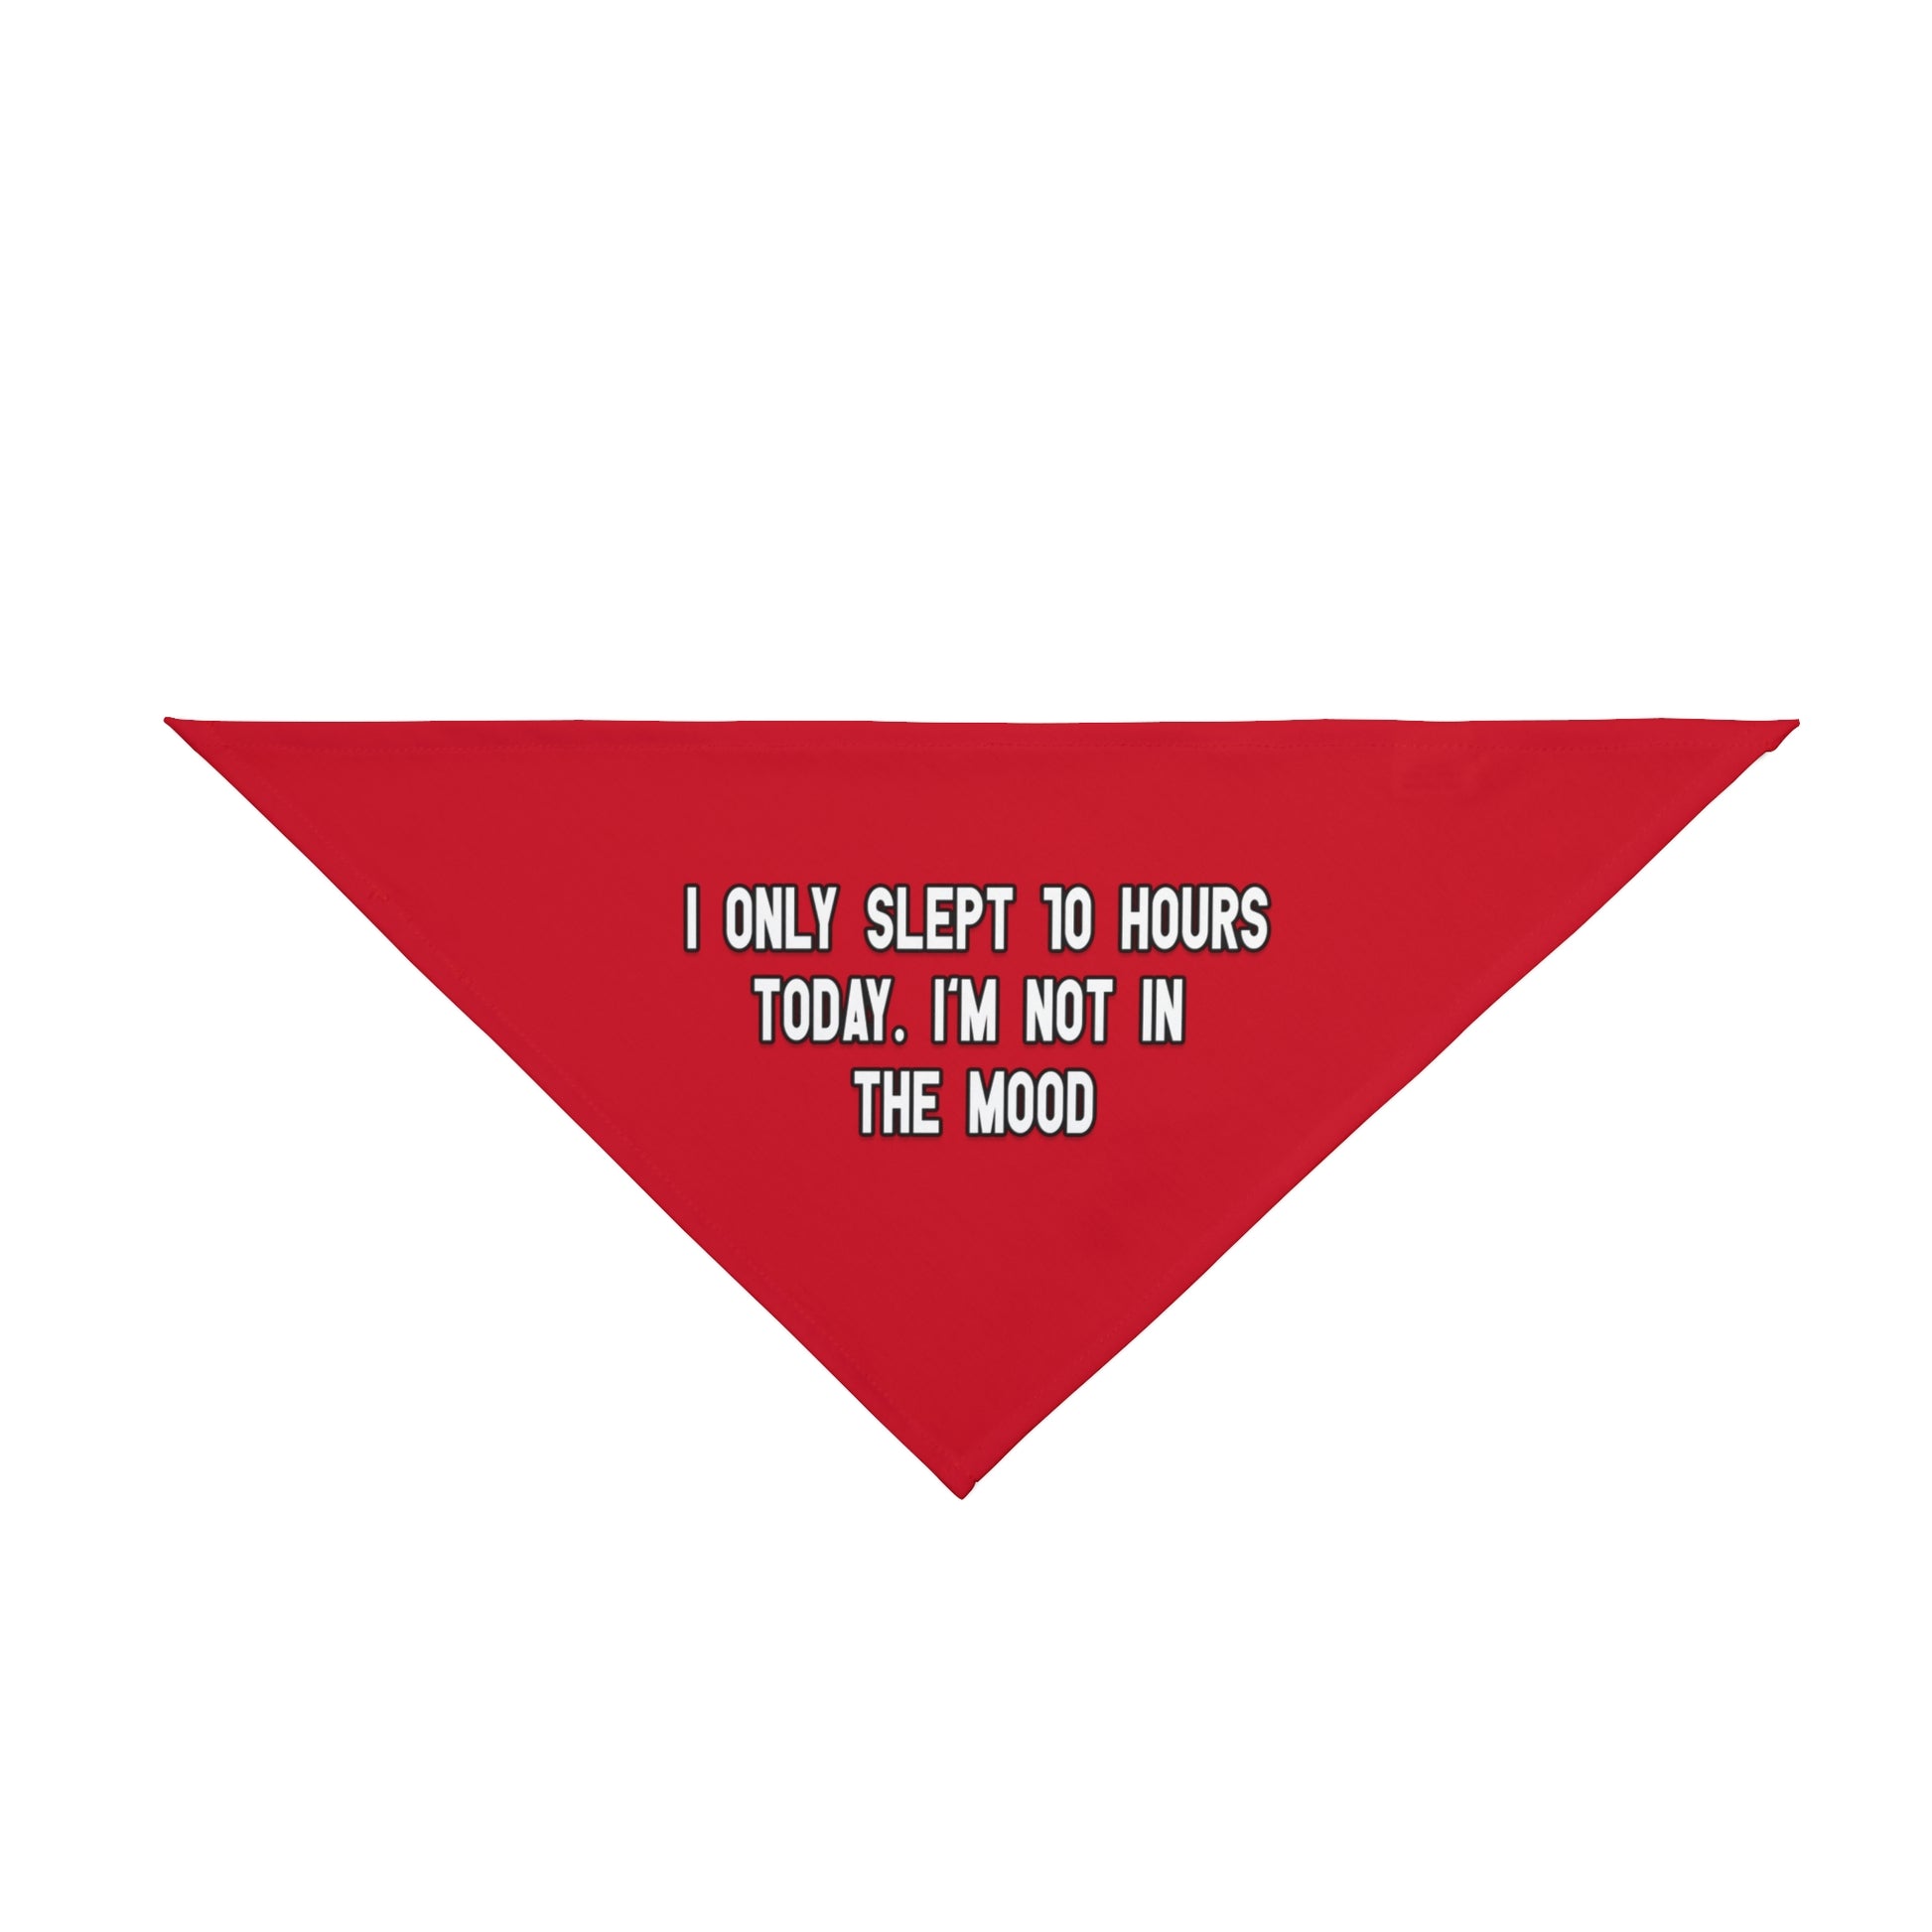 A bandana with the message: I ONLY SLEPT 10 HOURS TODAY. I'M NOT IN THE MOOD . Bandana's Color is red